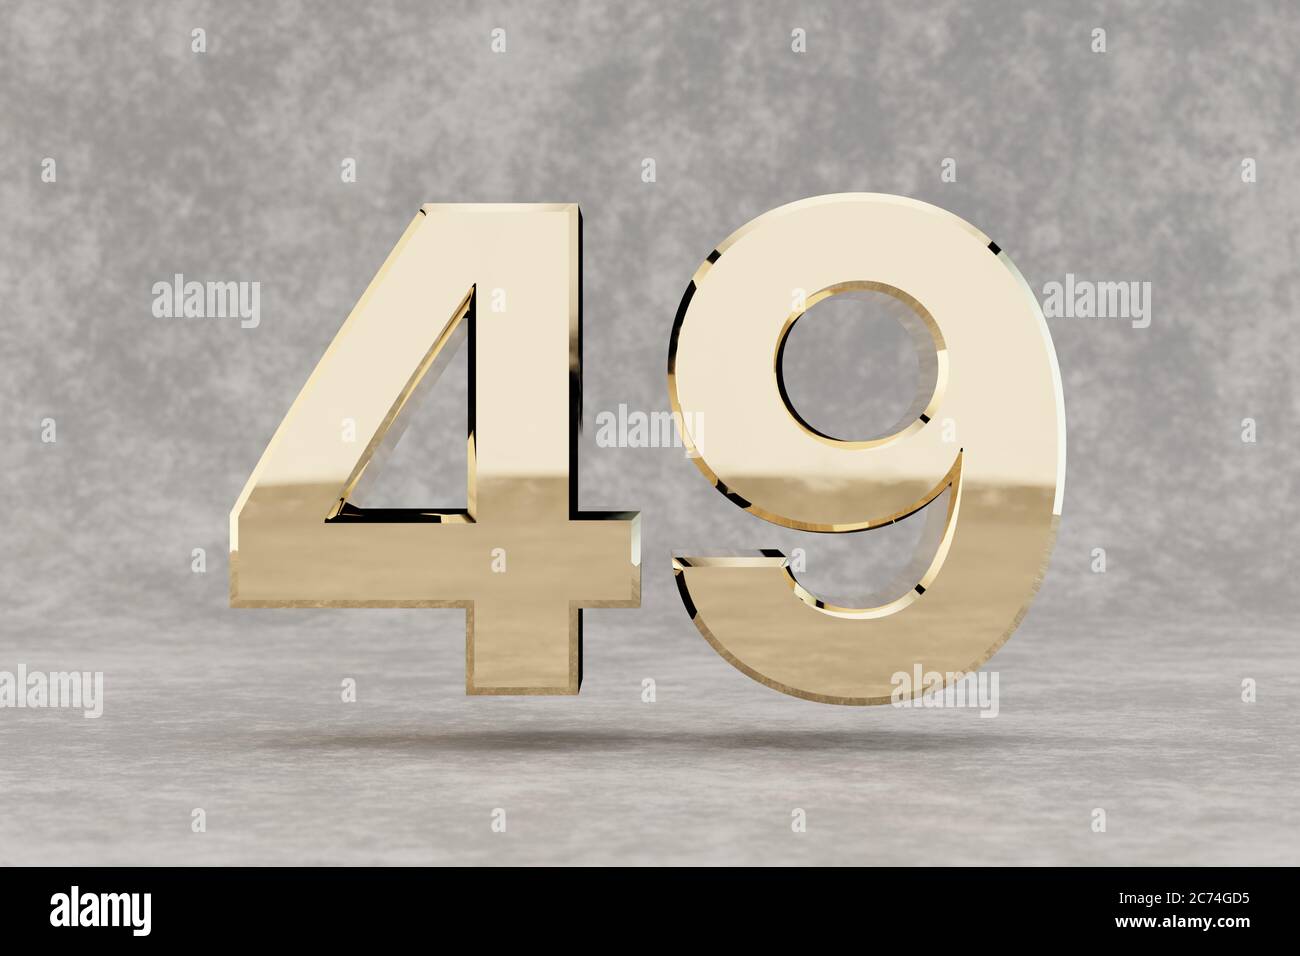 Gold 3d number 49. Glossy golden number on concrete background. Metallic digit with studio light reflections. 3d render. Stock Photo